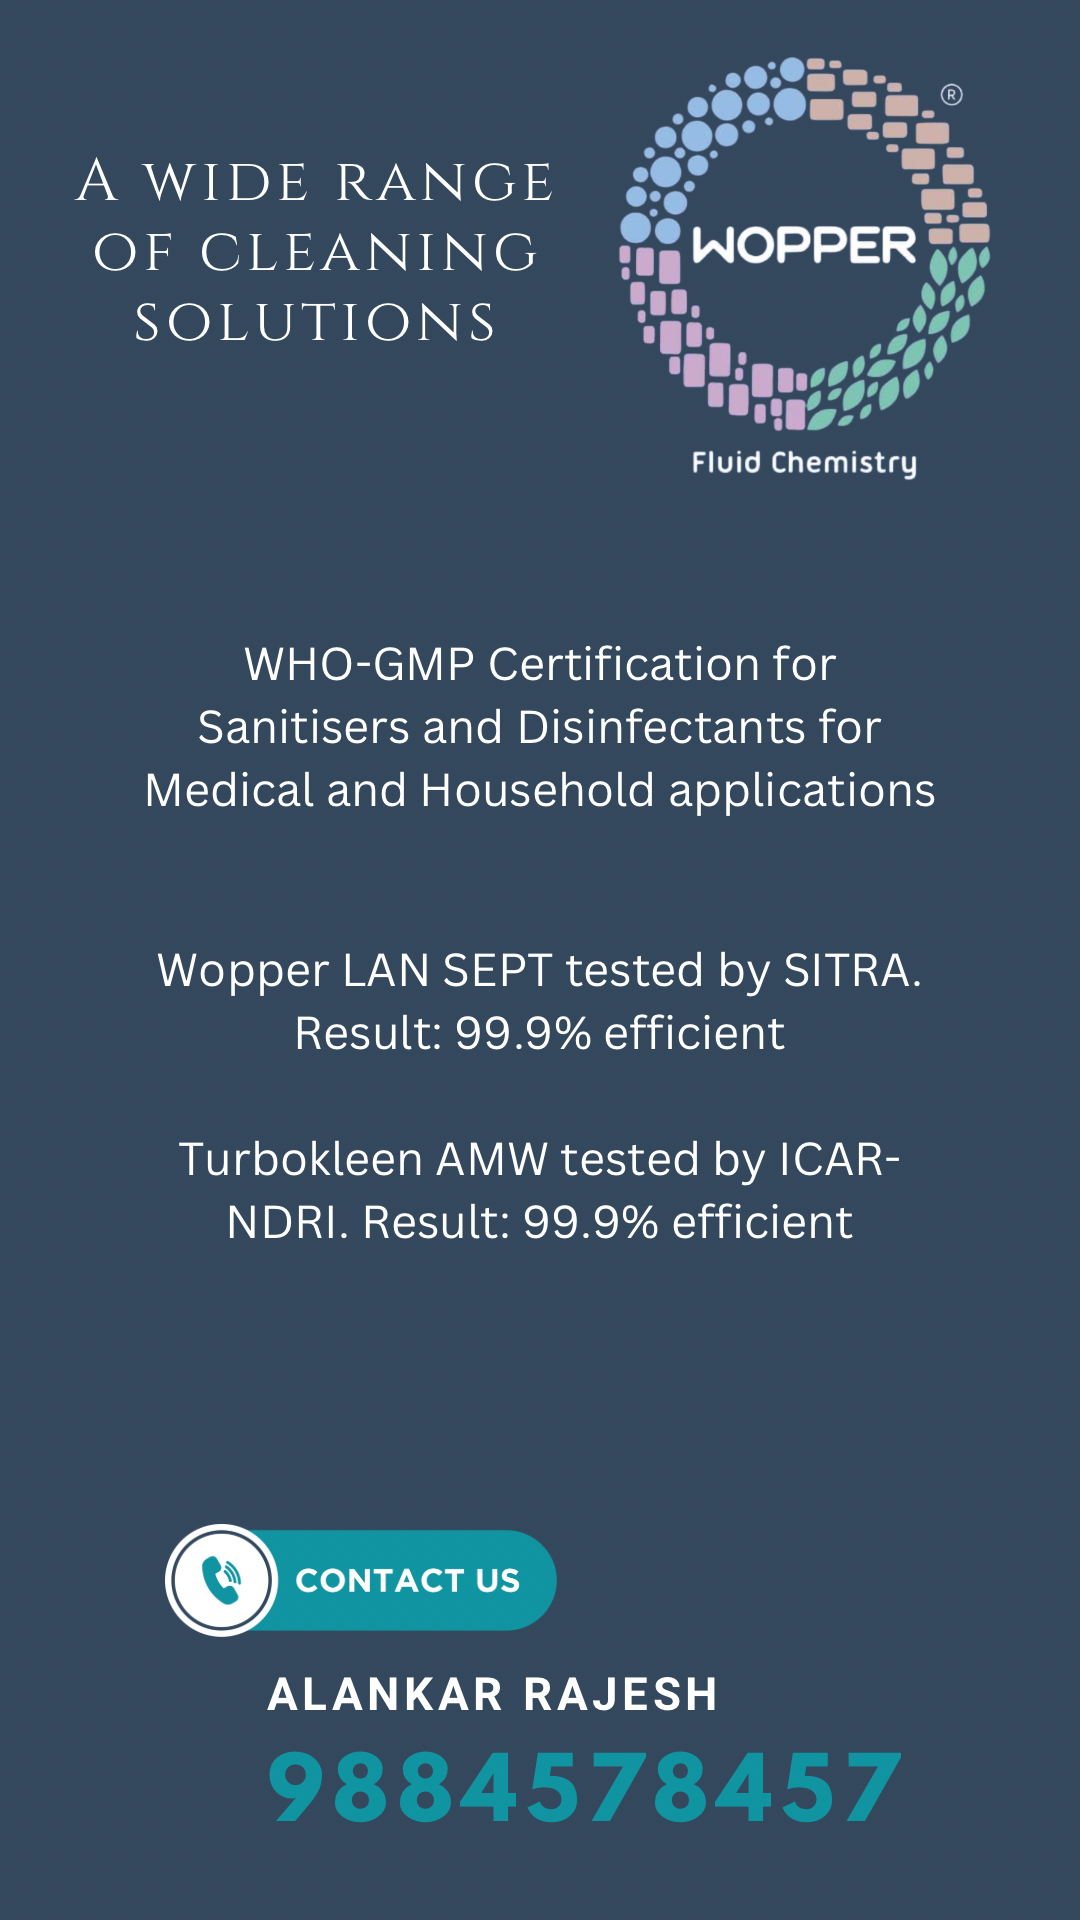 A WIDE RANGE OF CLEANING SOLUTIONS WHO-GMP Certification for Sanitisers and Disinfectants for Medical and Household applications